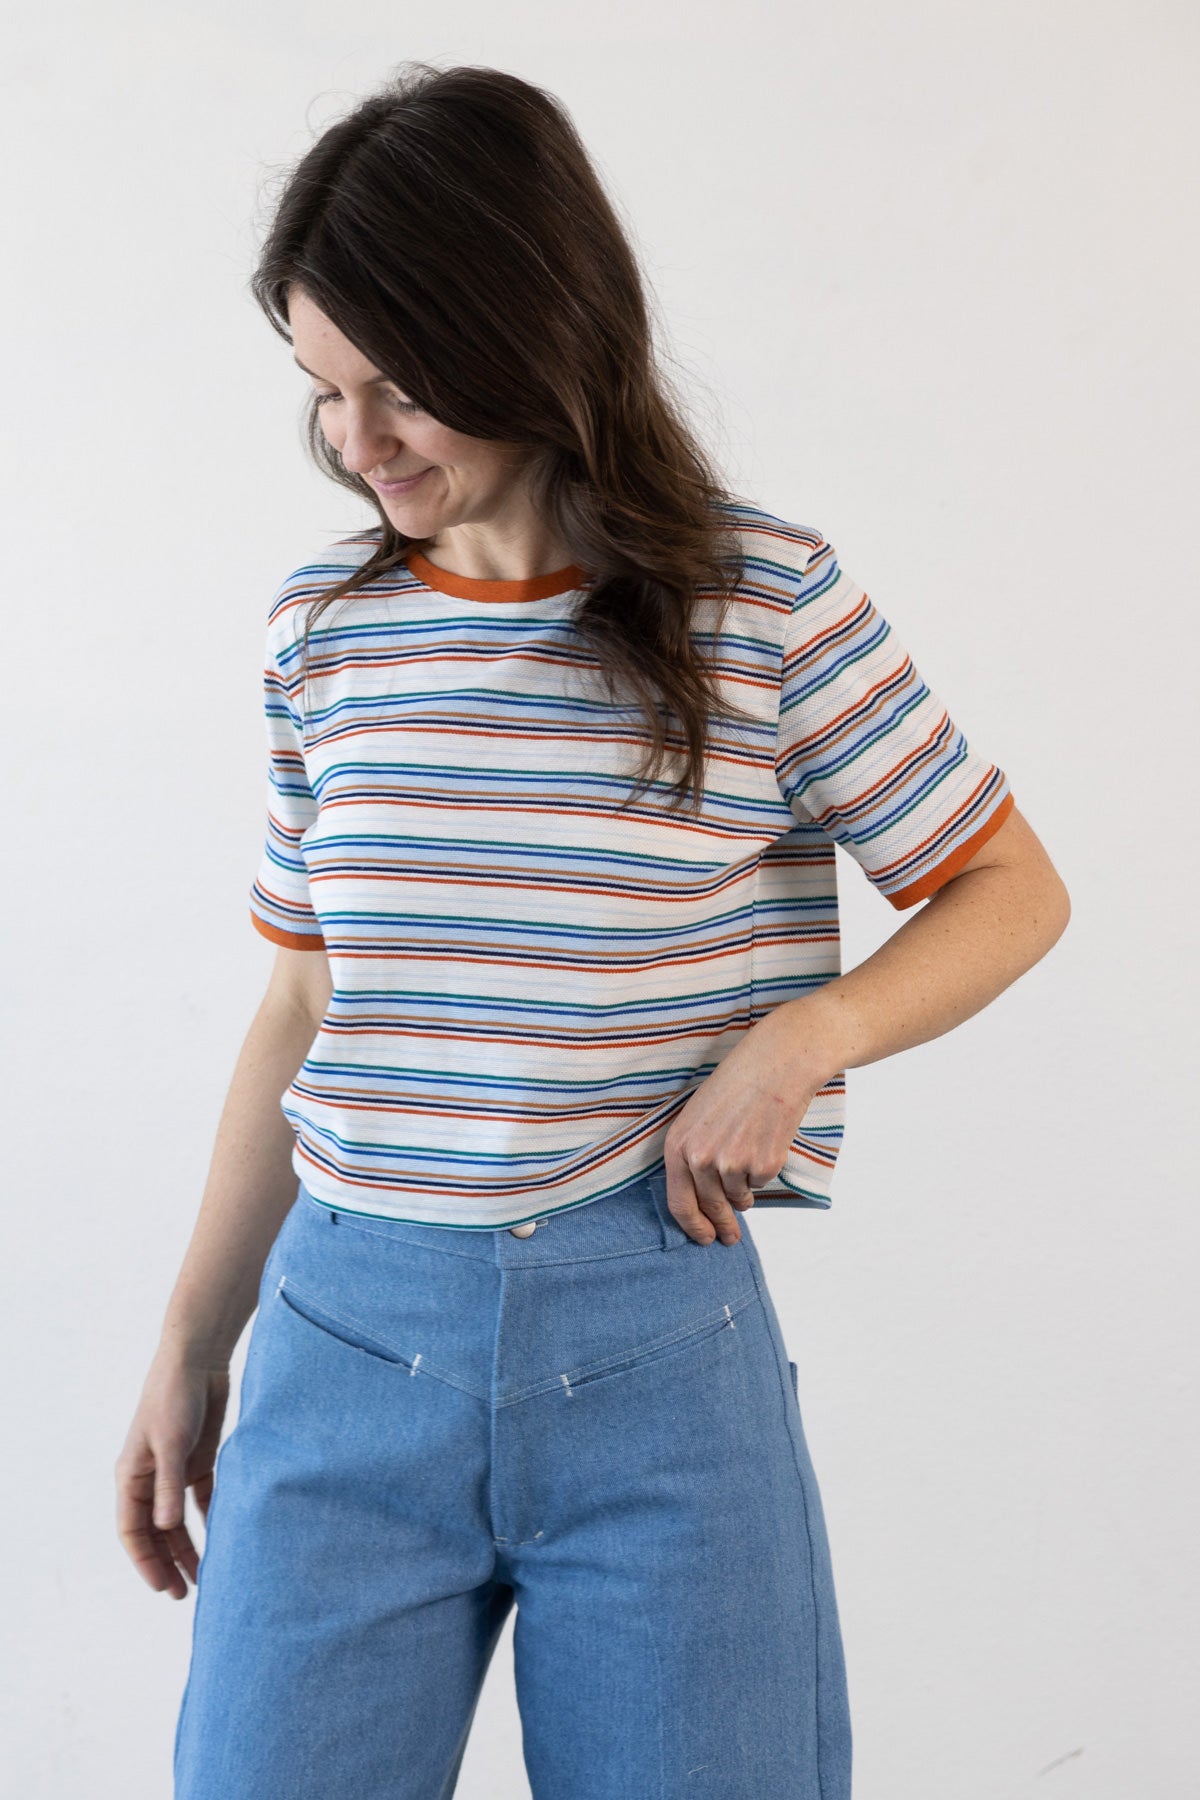 Products – Allie Olson Sewing Patterns